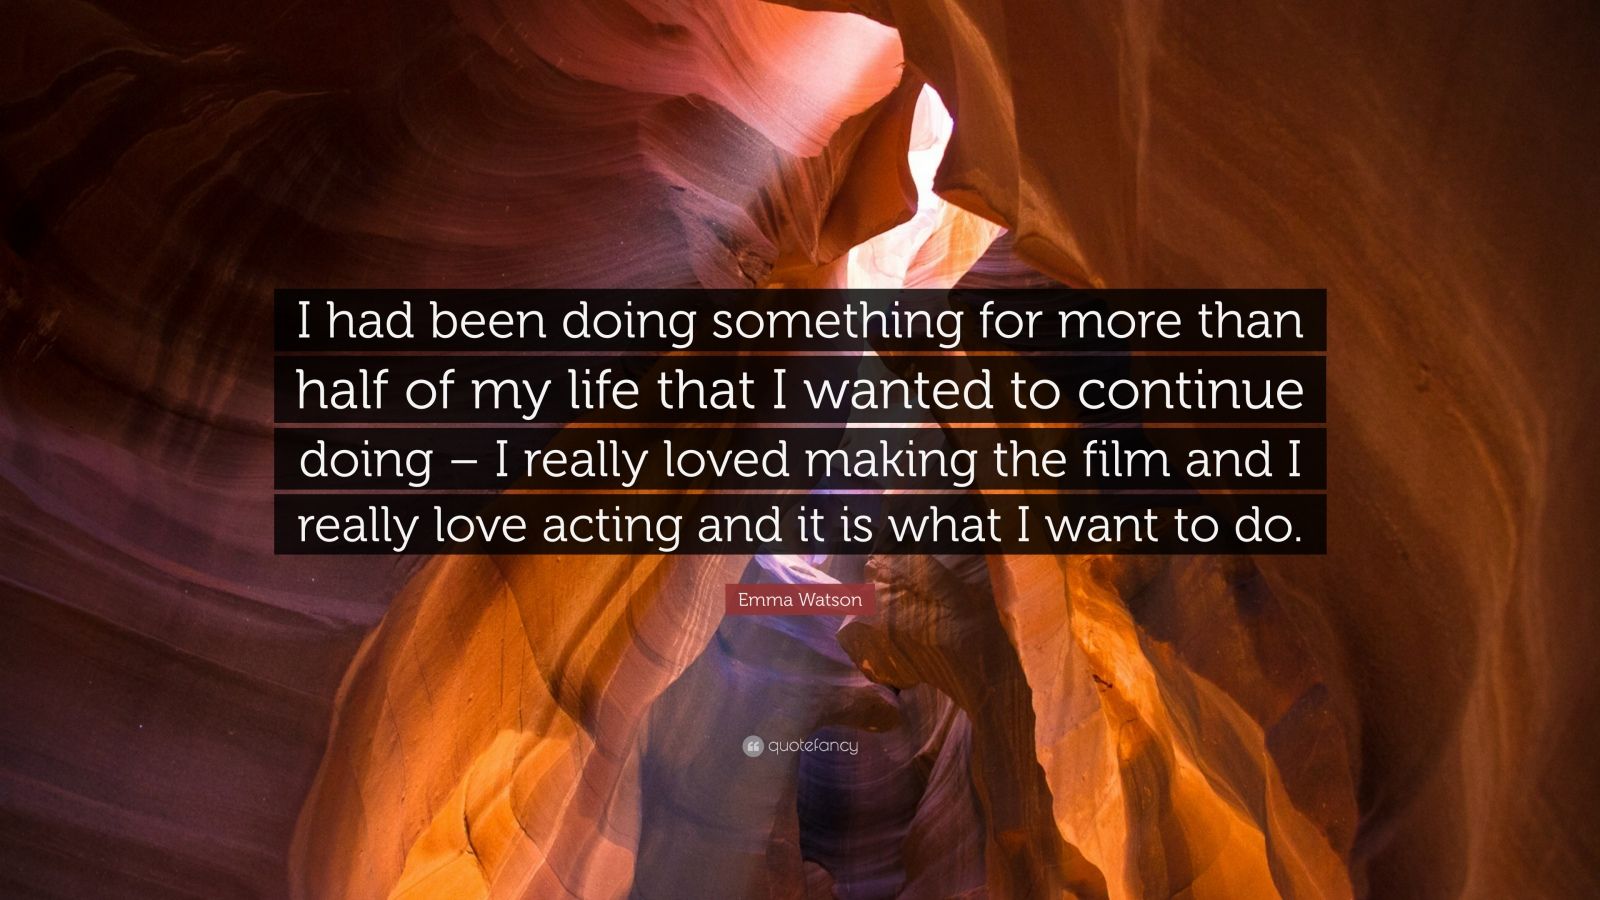 Emma Watson Quote “I had been doing something for more than half of my